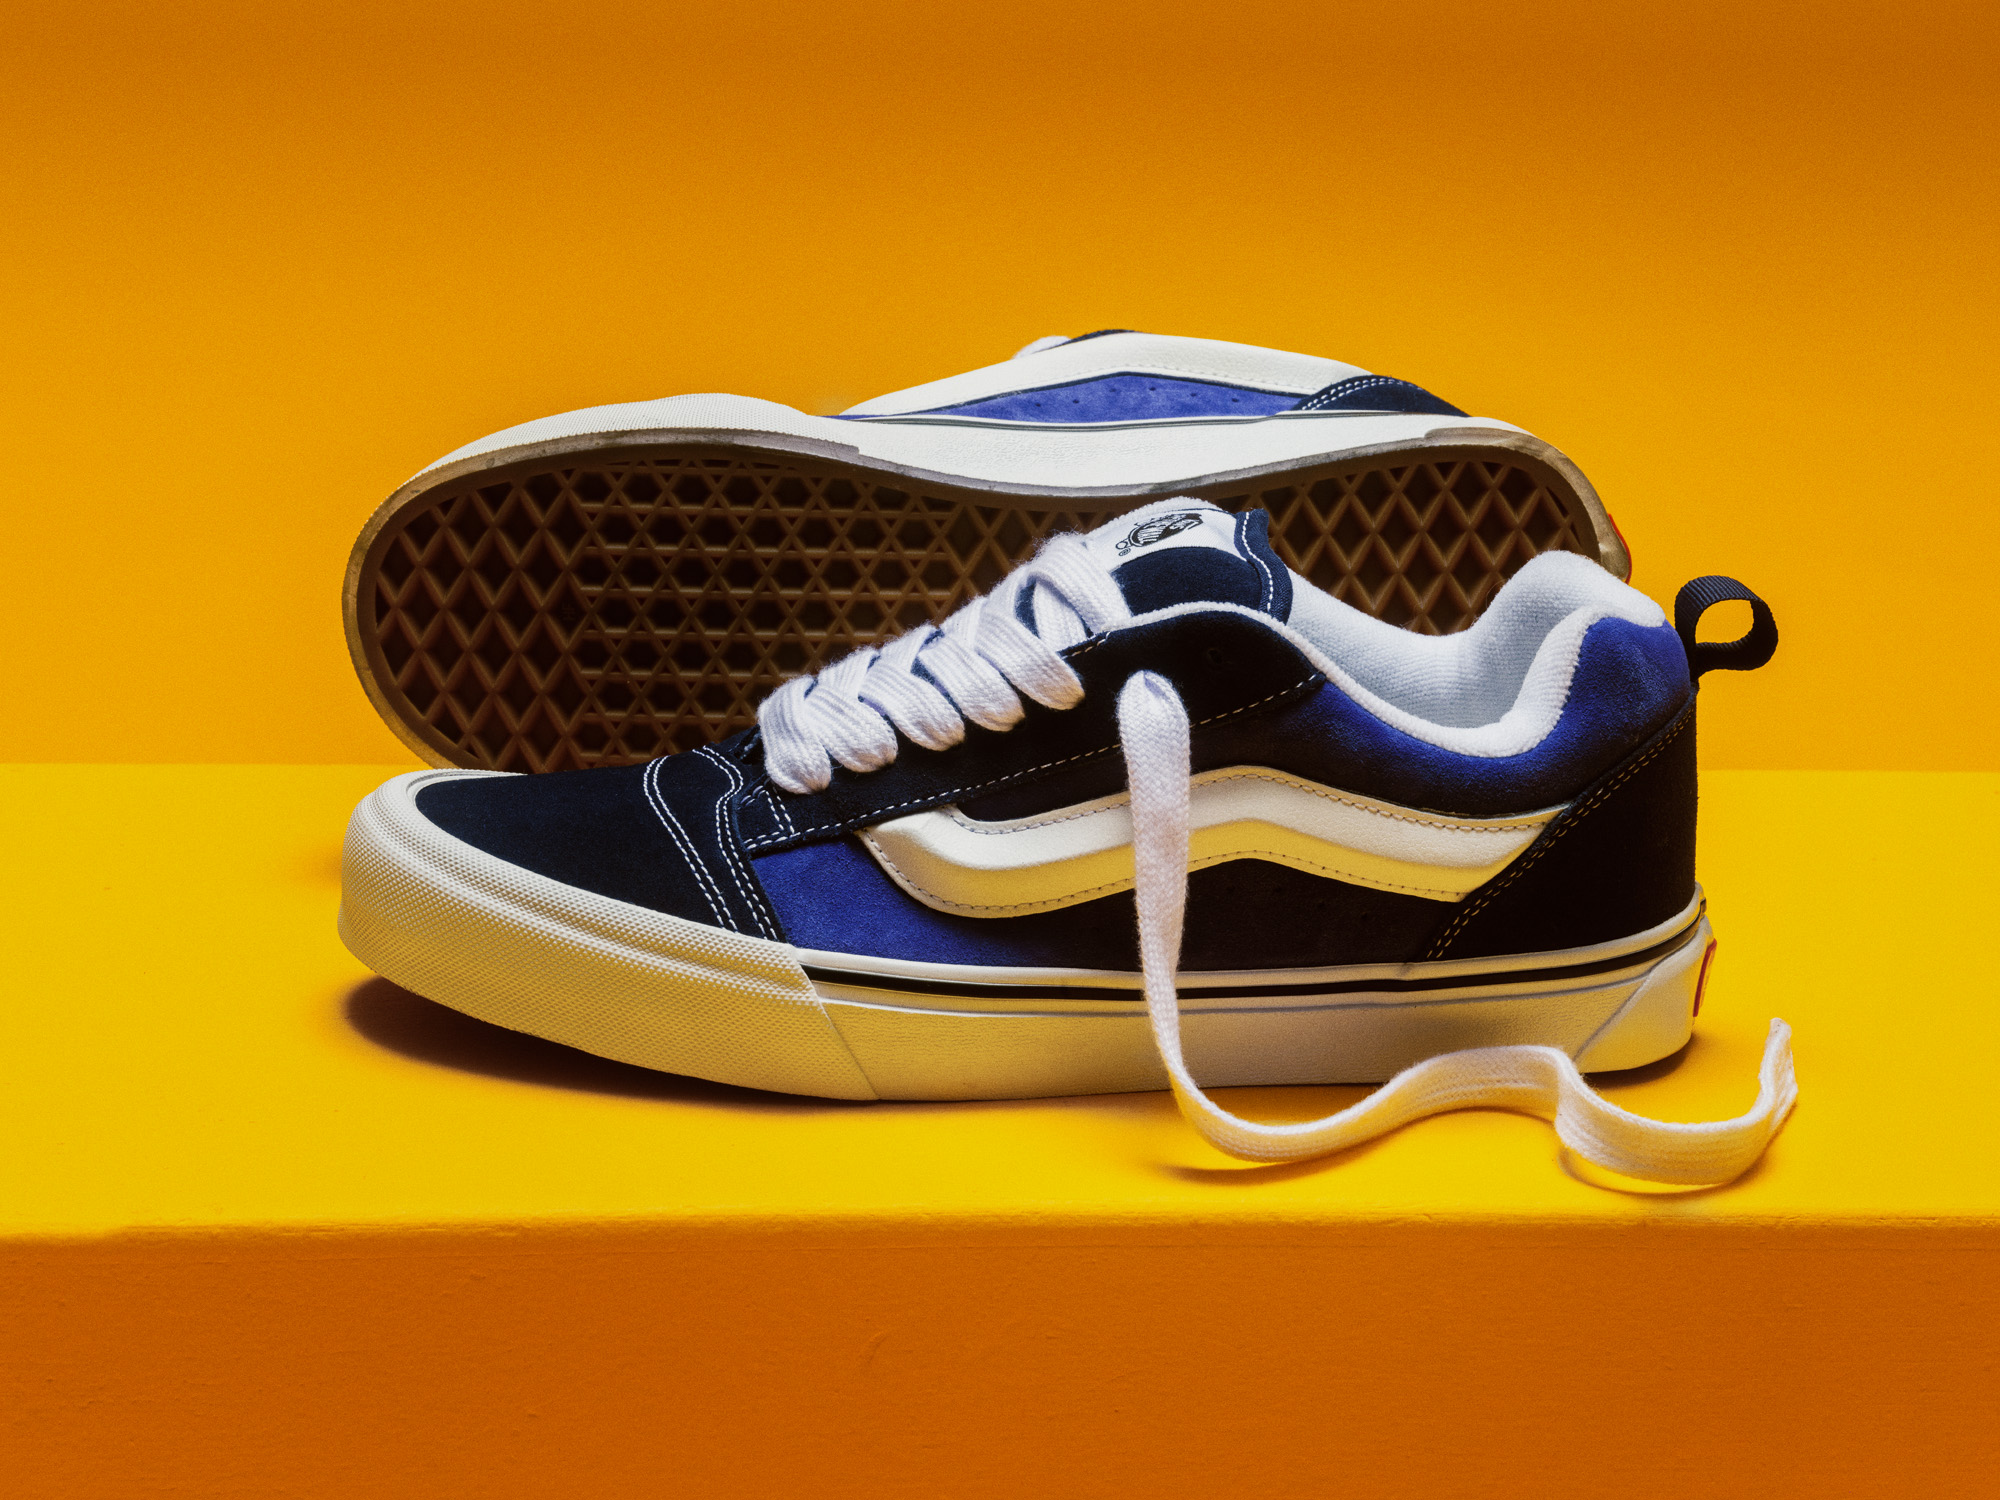 Vans’ Latest Campaign is “Off The Wall” - Bubblegum Club